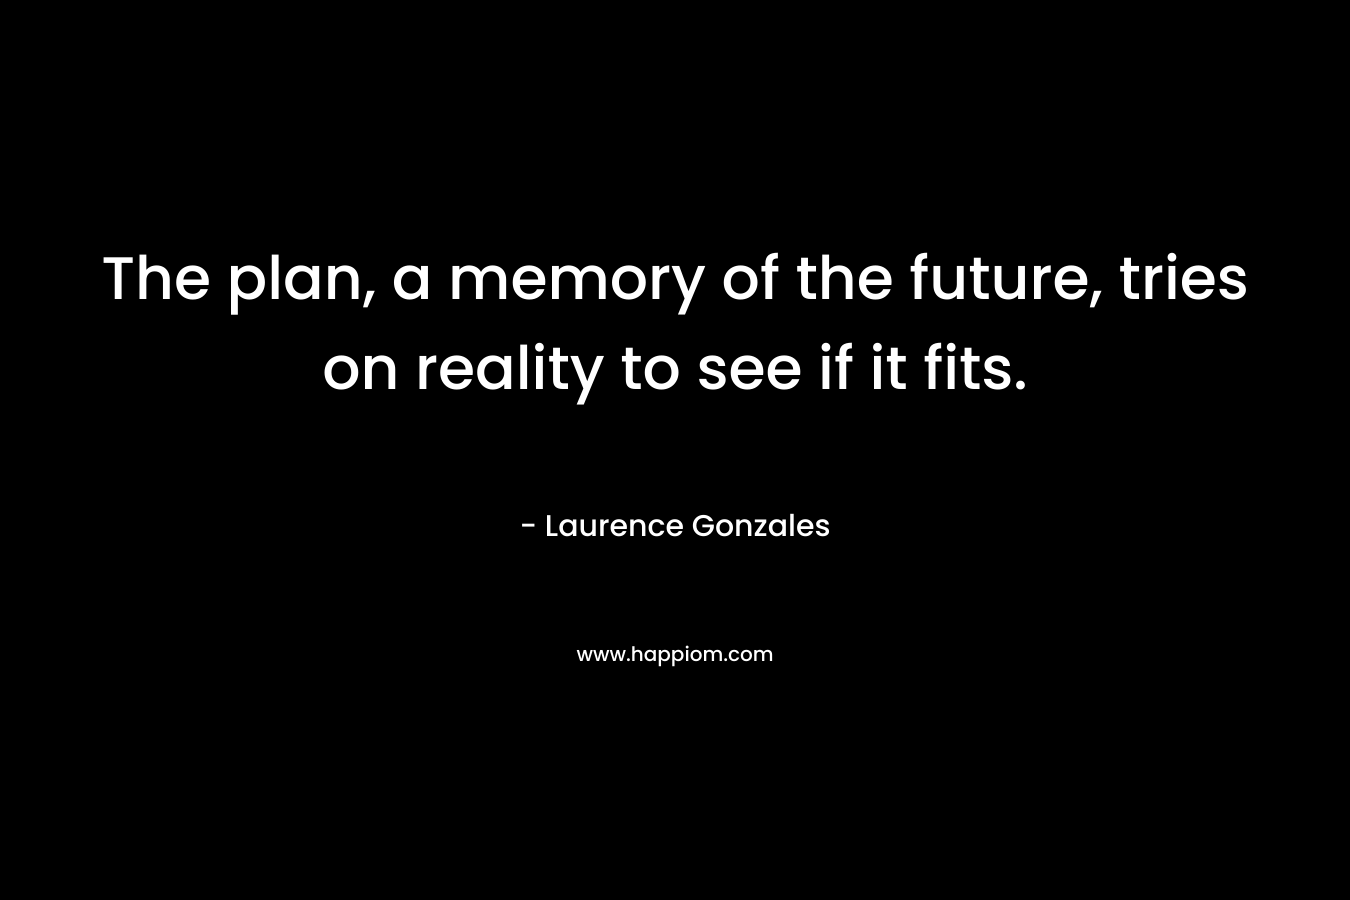 The plan, a memory of the future, tries on reality to see if it fits. – Laurence Gonzales